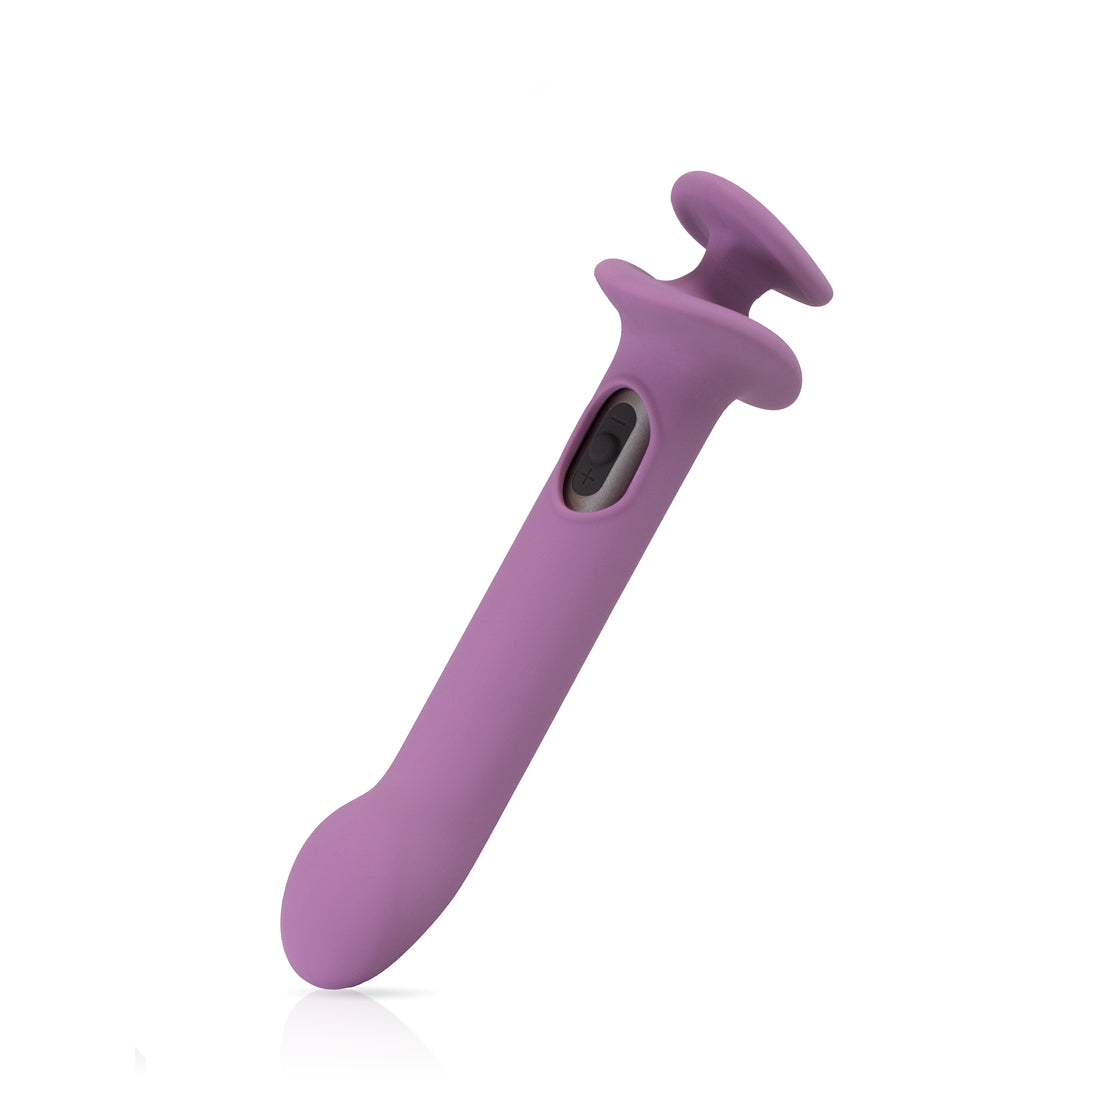 Angle front facing finger grip vibrator sleeve purple with bullet vibrator